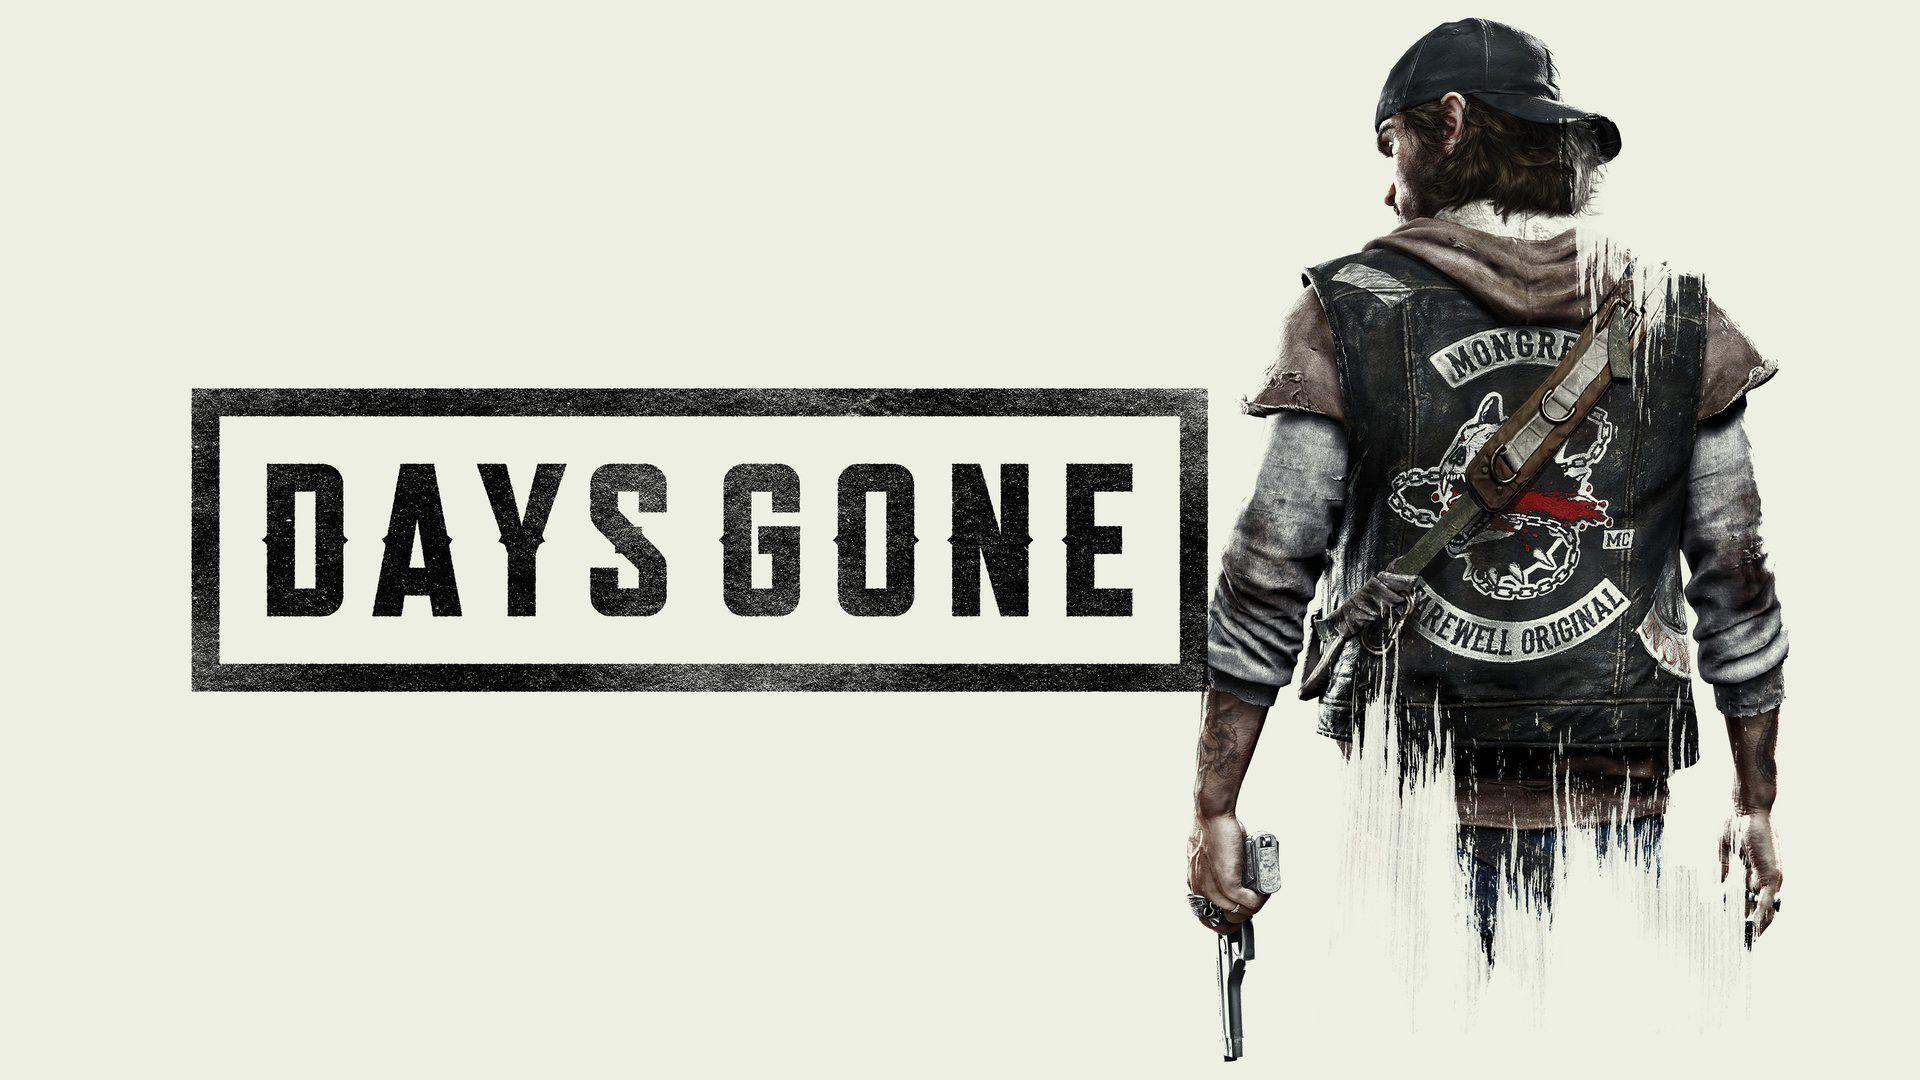 100+] Days Gone Wallpapers | Wallpapers.com